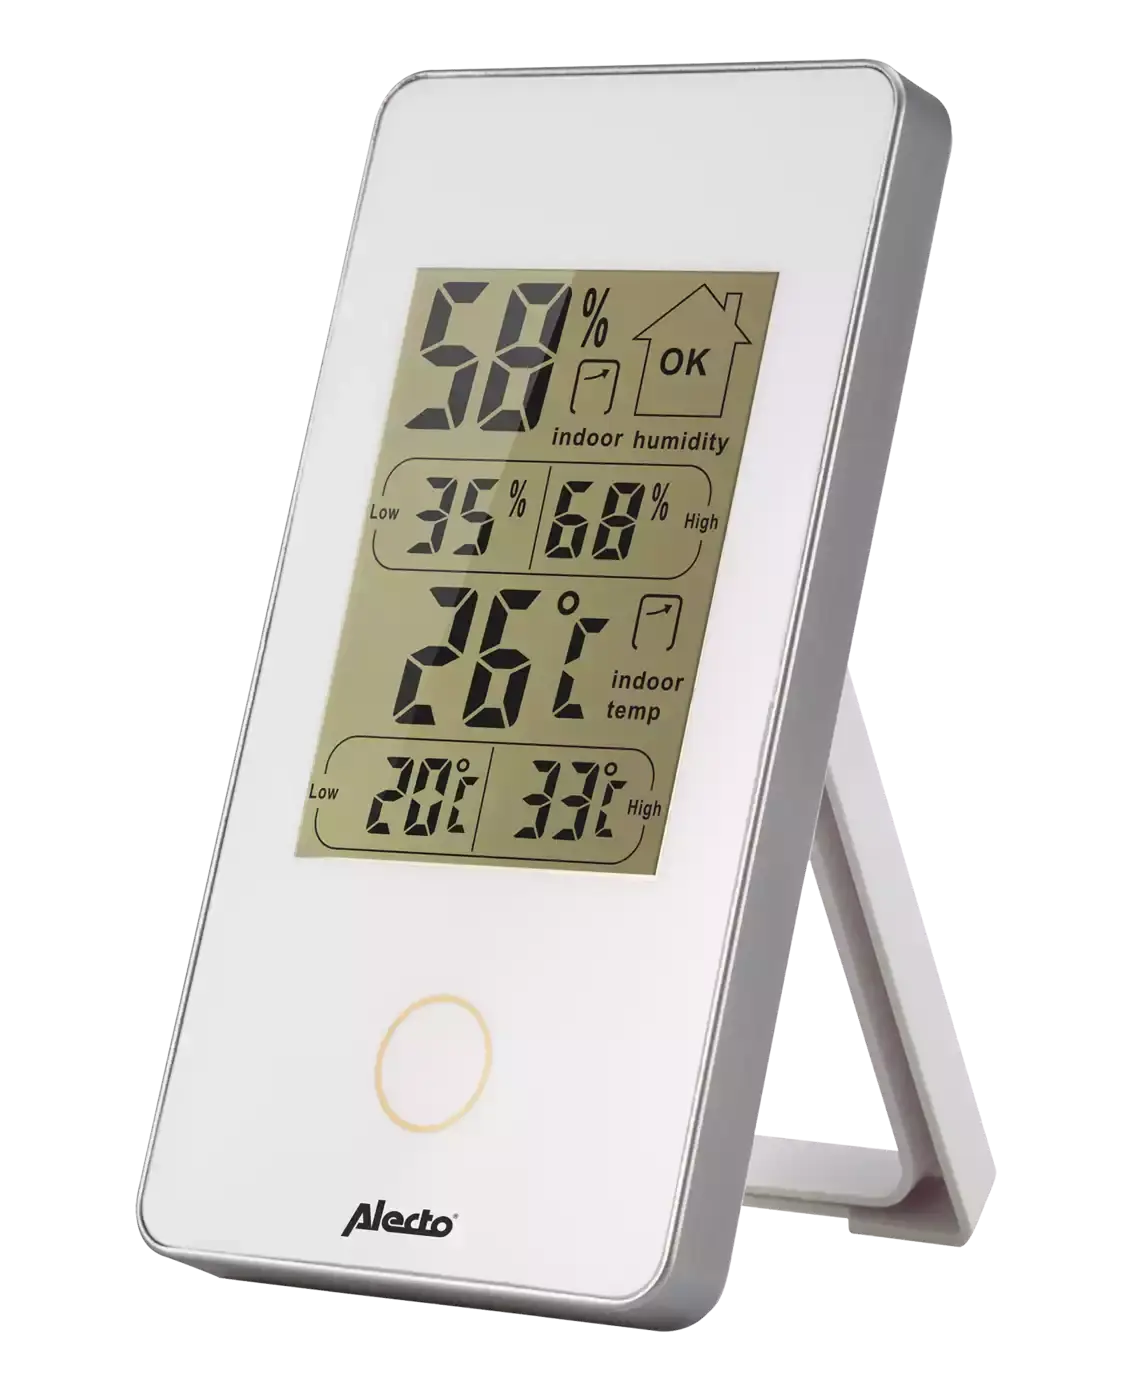 Digitales Innen-Thermometer WS-75 Alecto baby 2000574239903 3